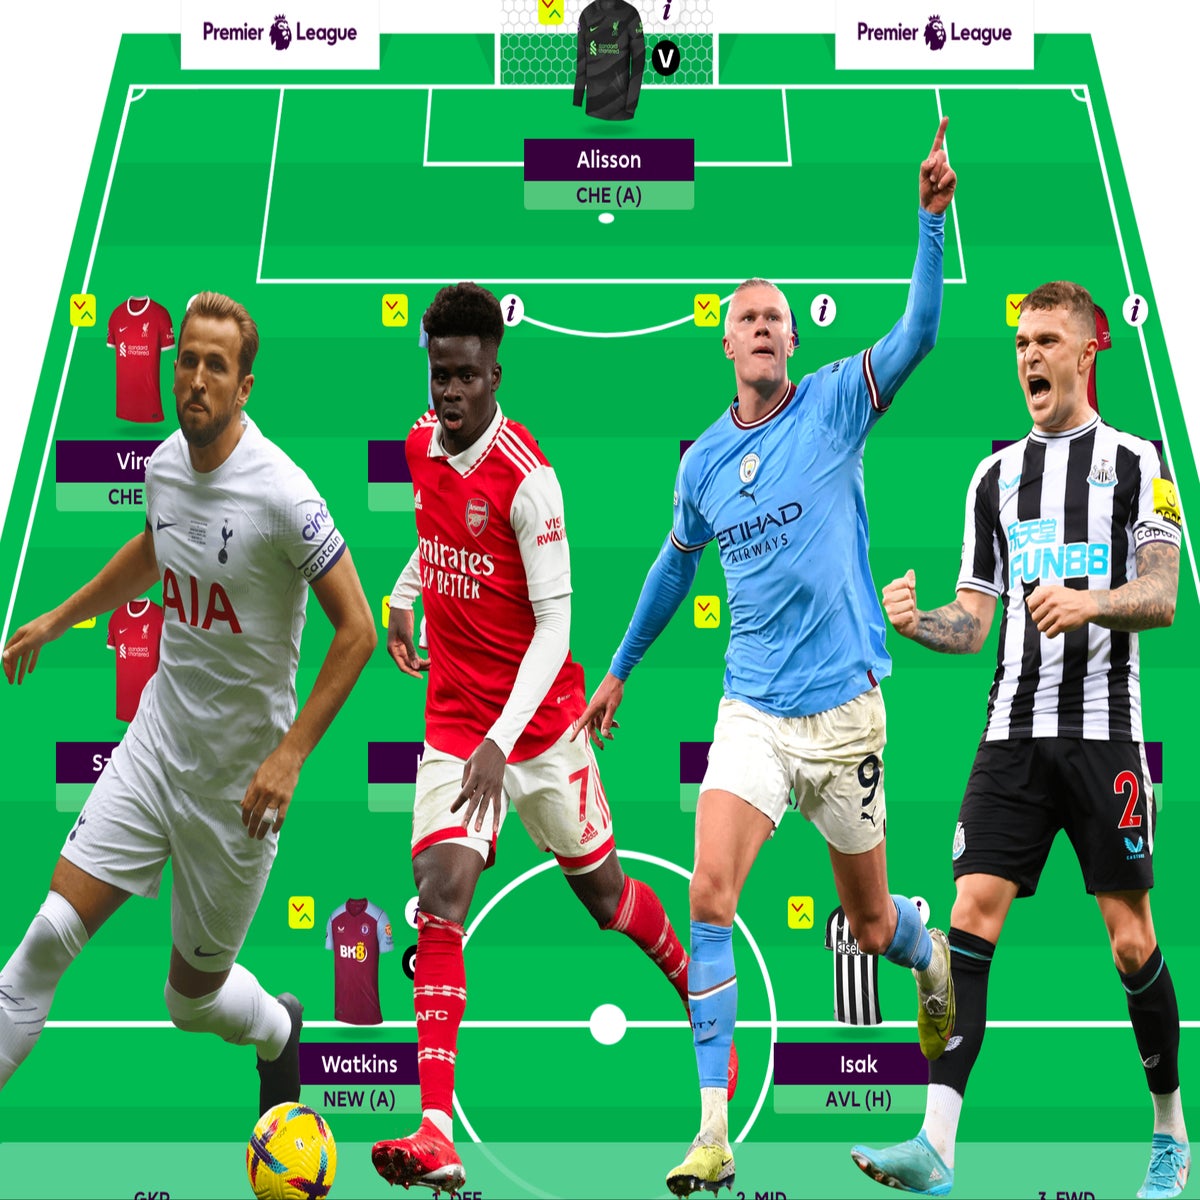 Premier League squads in full: how many foreign players in your team?